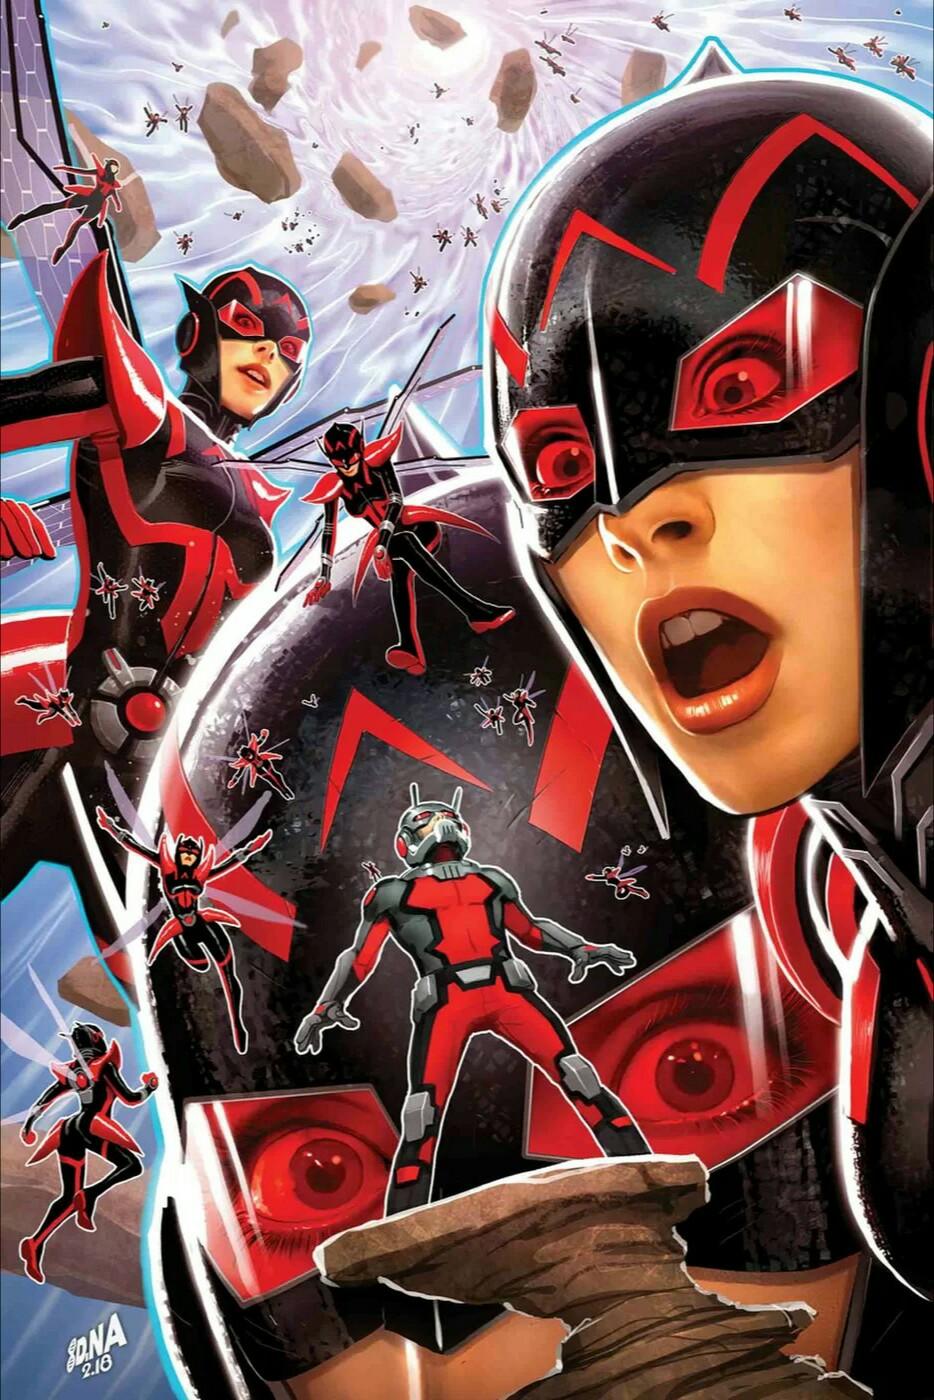 Ant-Man and the Wasp Vol. 1 #3